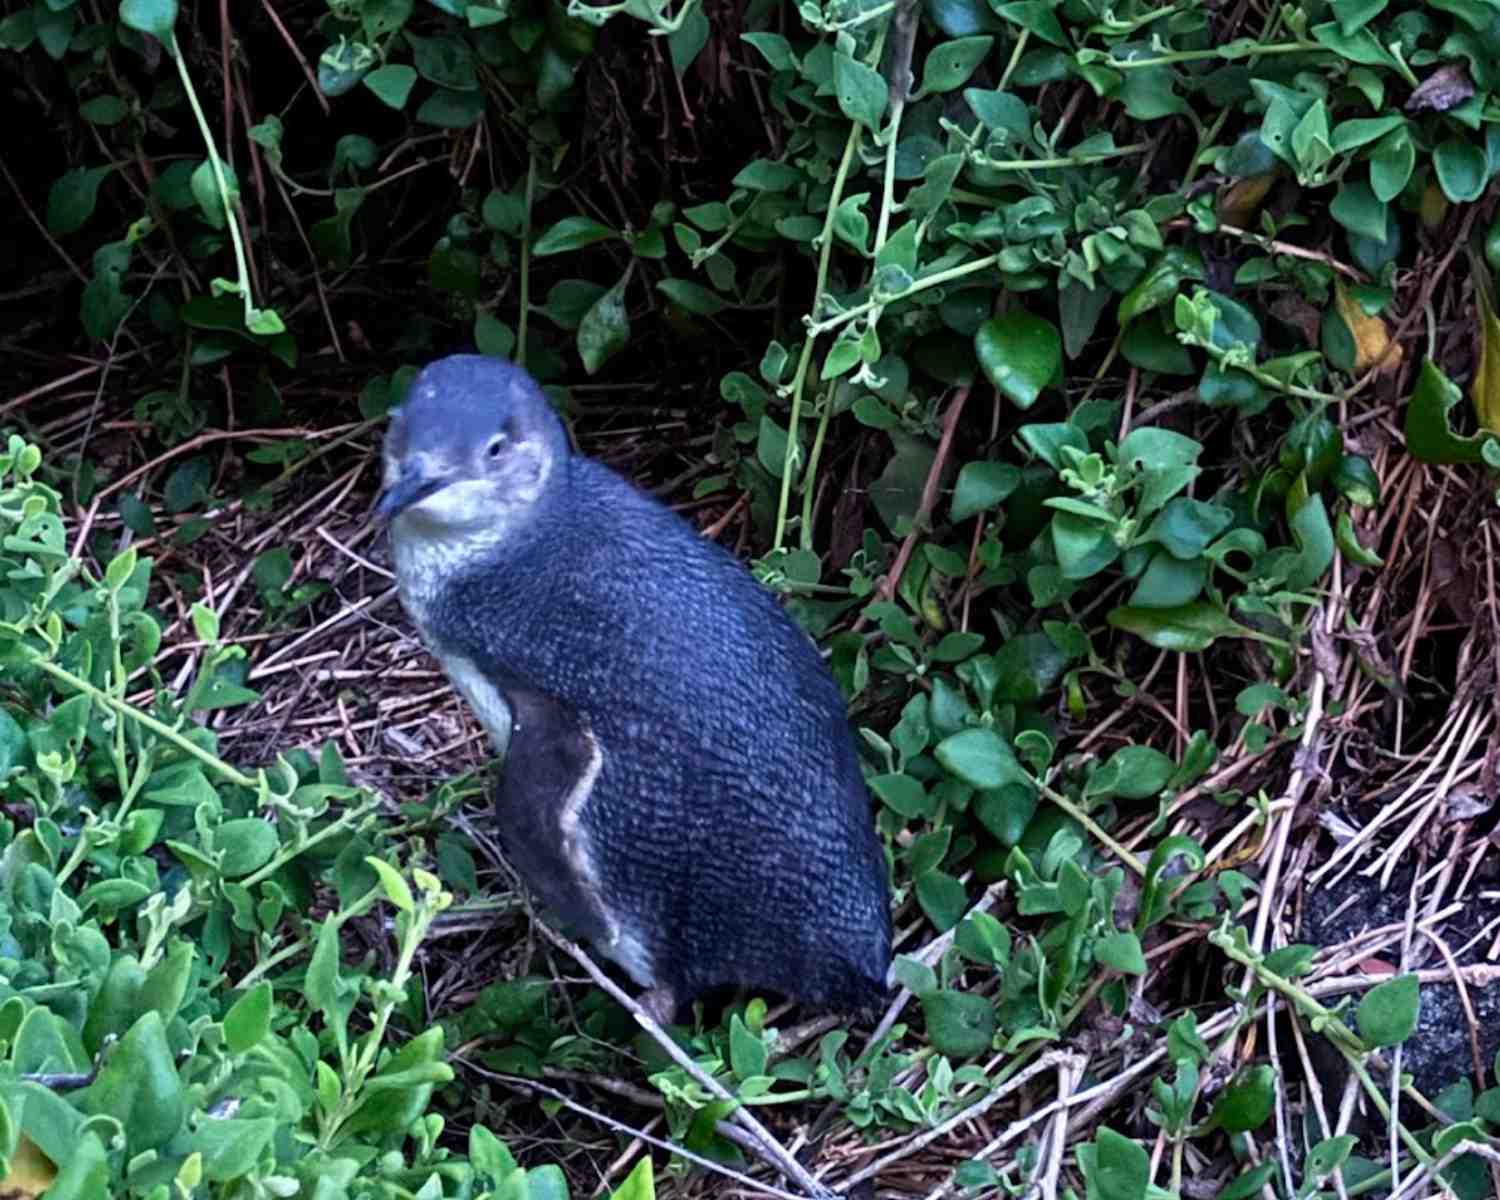 Finding Little Penguins in Tasmania with kids